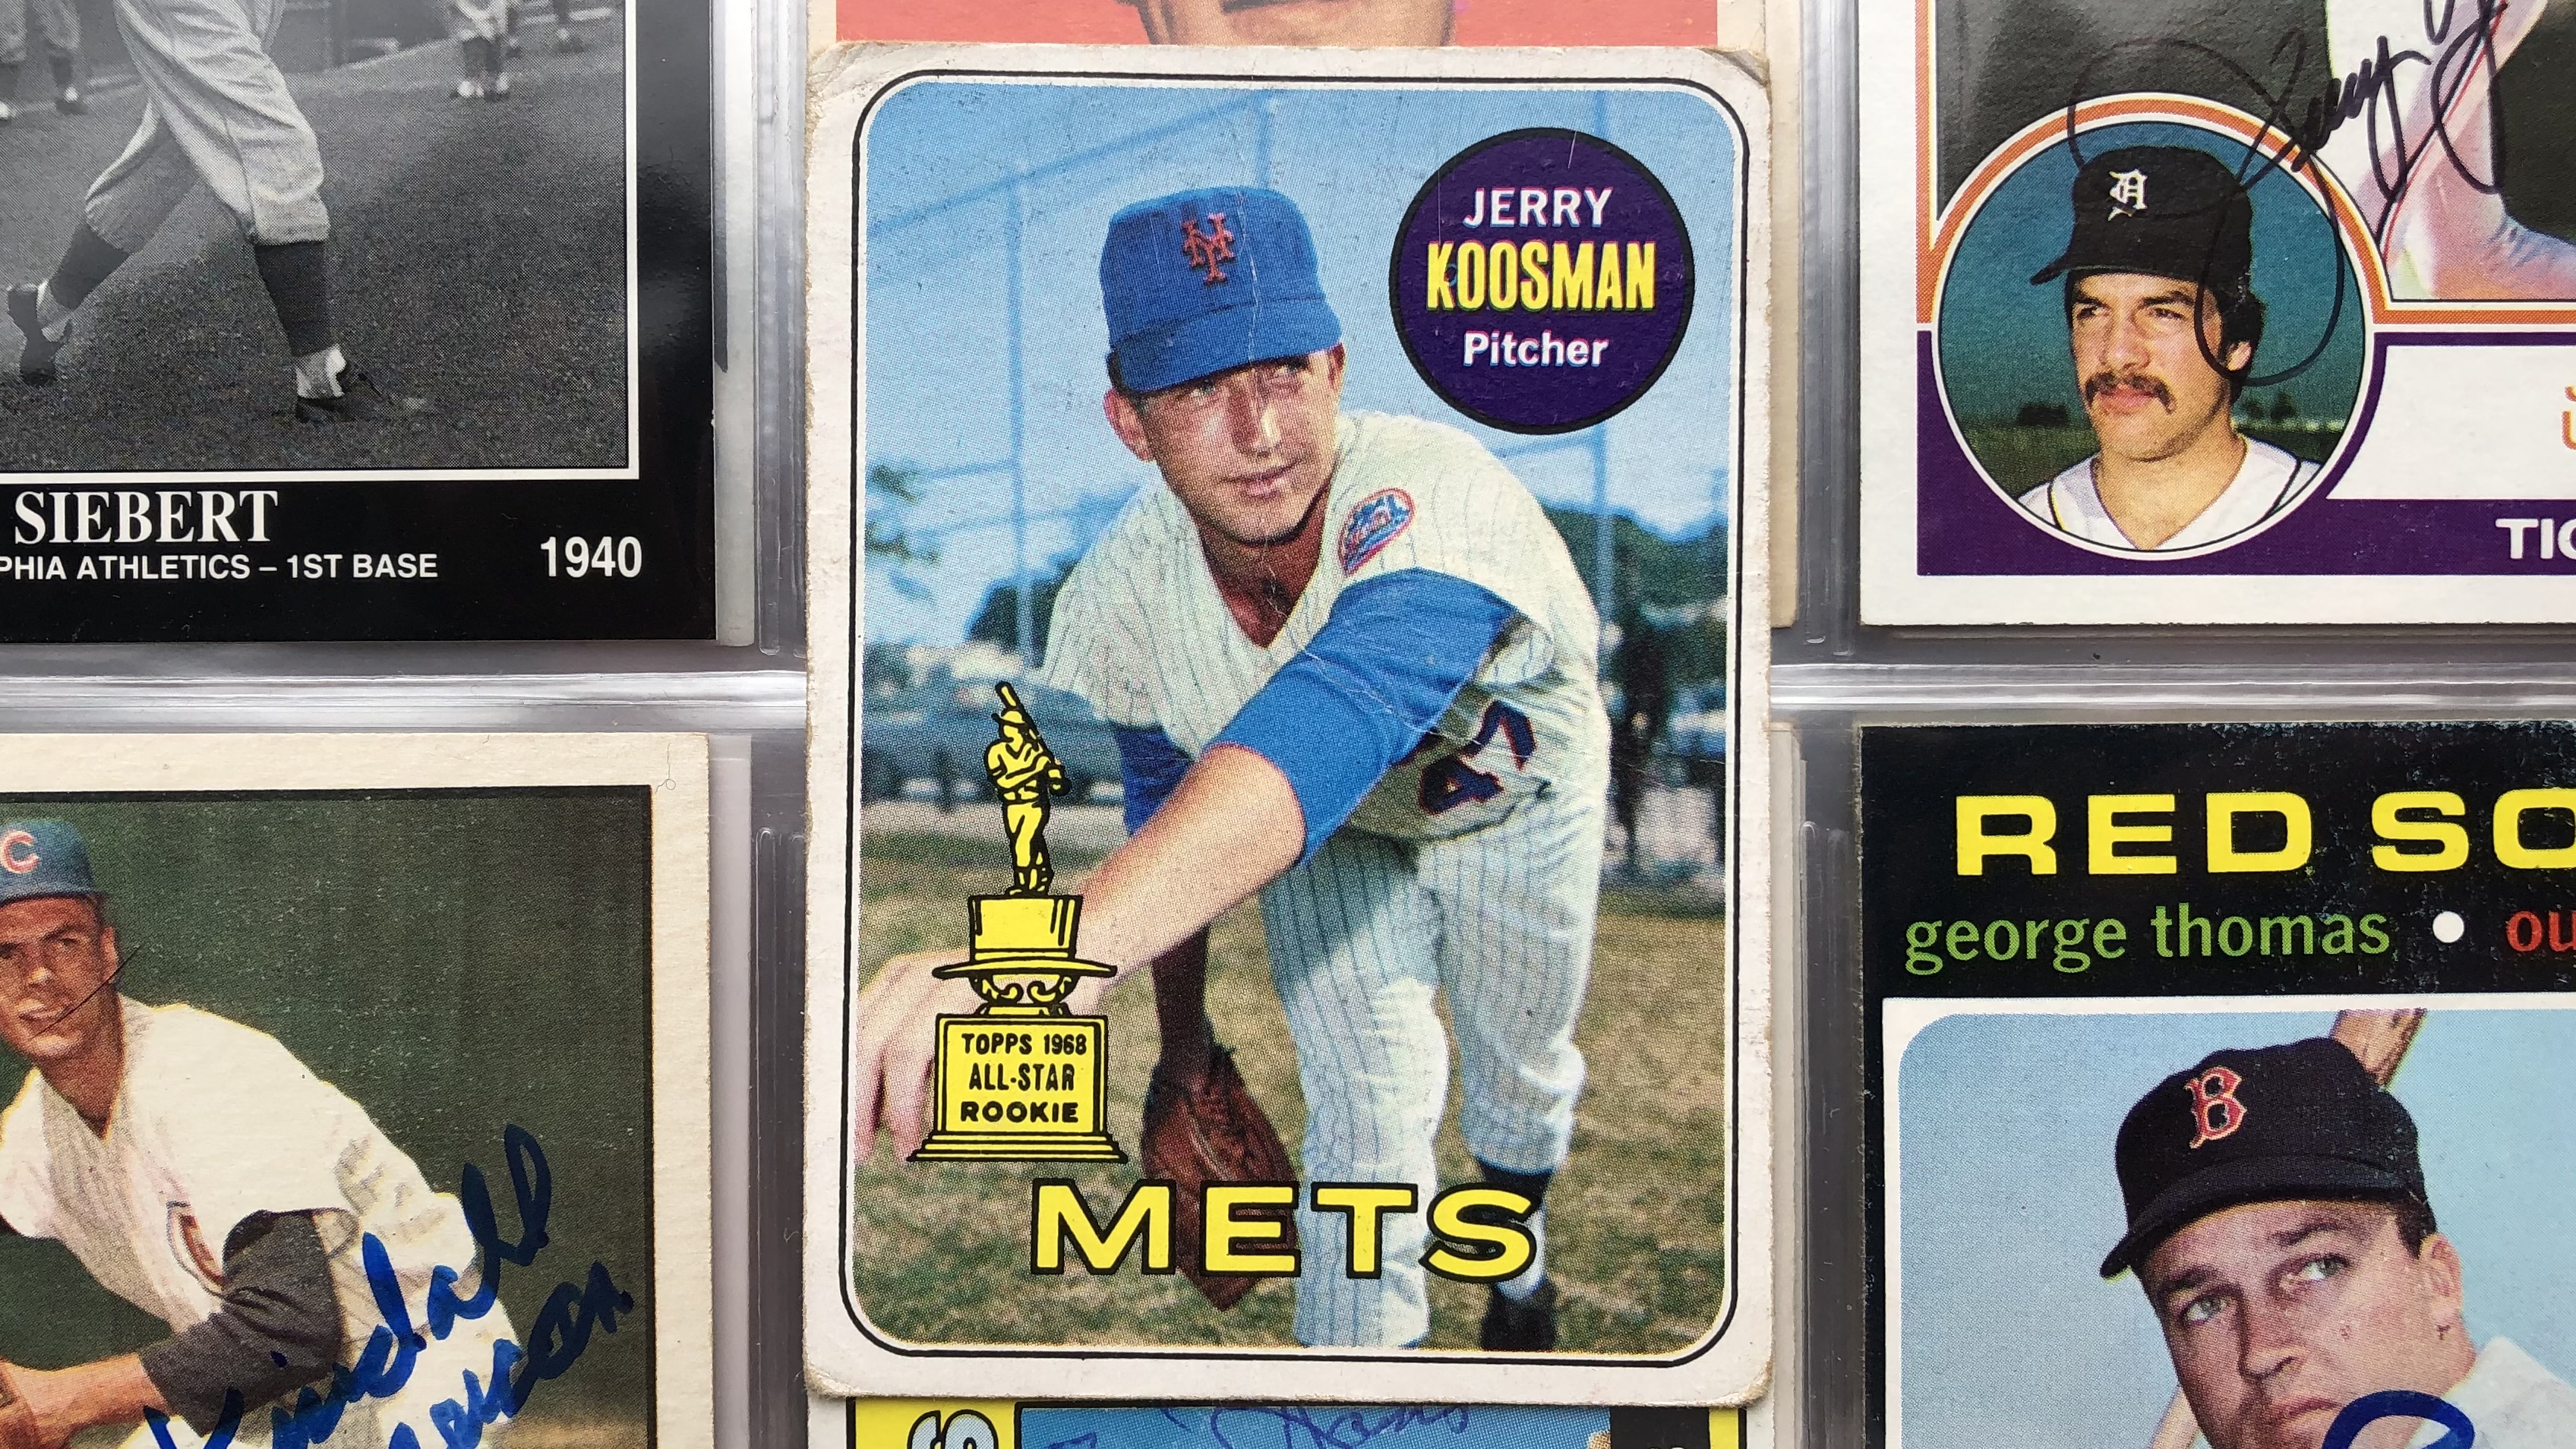 The Twins Almanac ⚾️ on X: Minnesota native Jerry Koosman pitched six  no-hit innings before finally yielding a hit and a run in Game 2 of the World  Series on this date